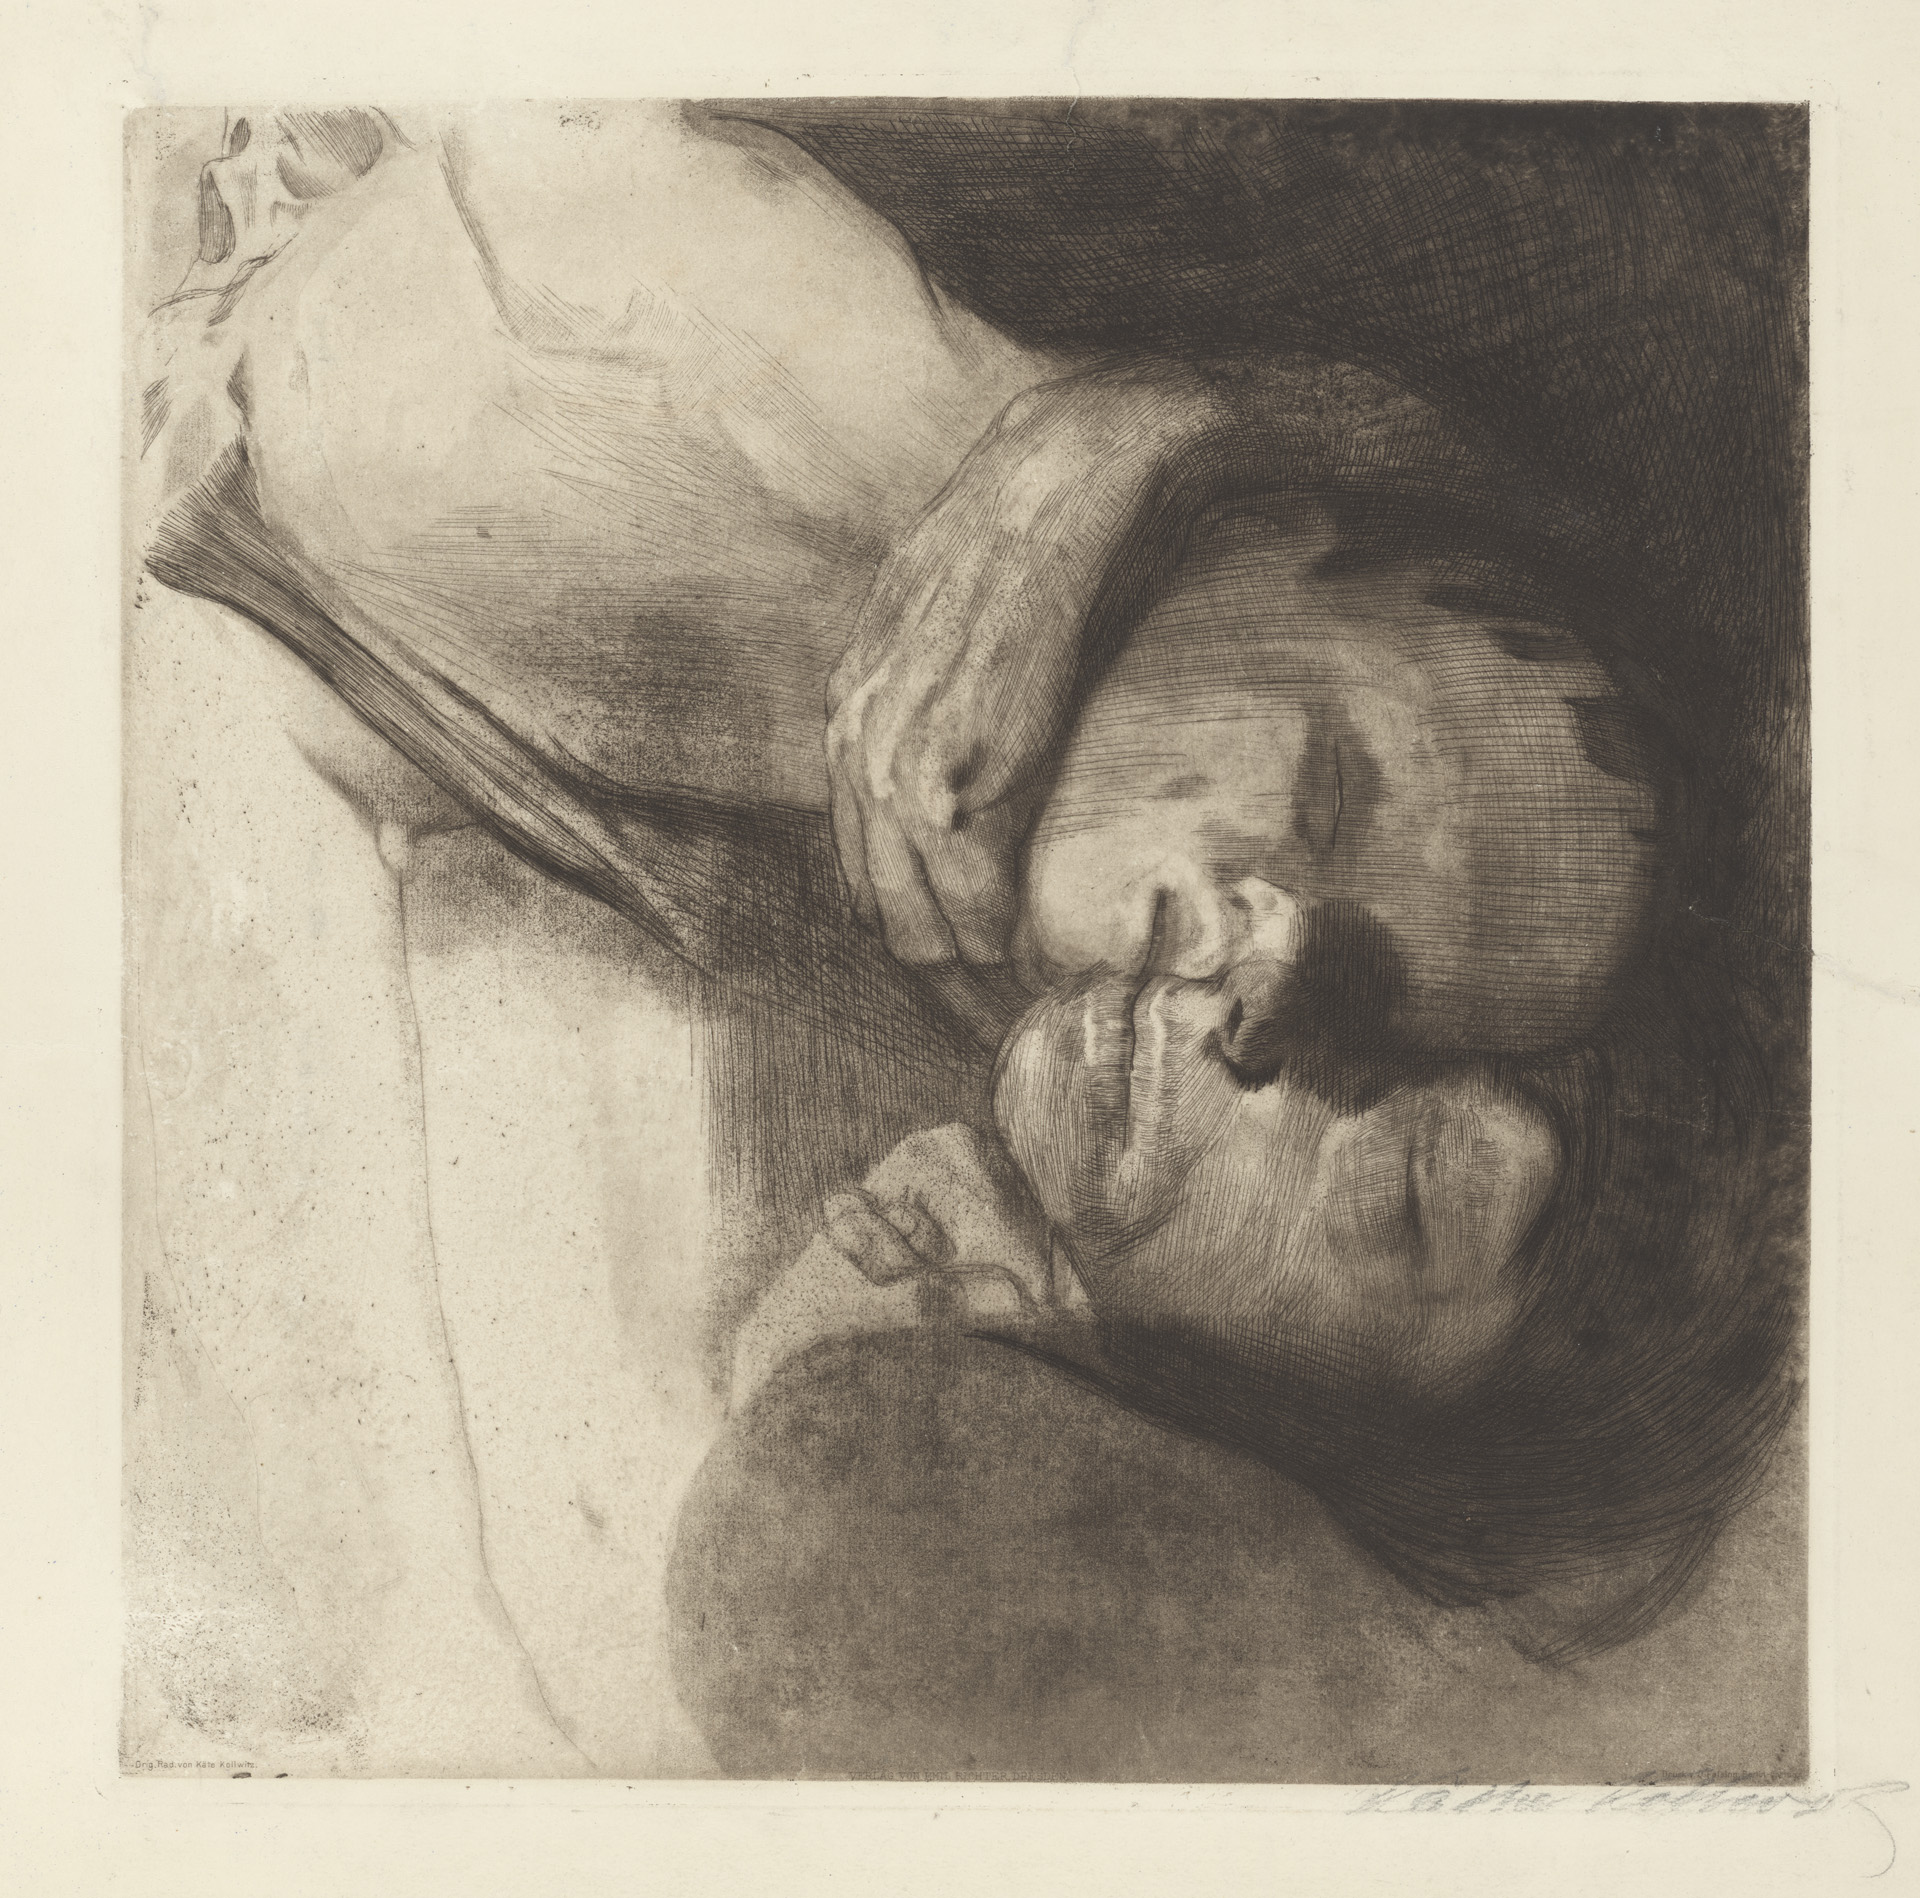 Käthe Kollwitz, Death, Woman and Child, 1910, line etching, drypoint, sandpaper and vernis mou with imprint of laid paper and Ziegler's transfer paper, Kn 108 XIII, Cologne Kollwitz Collection © Käthe Kollwitz Museum Köln